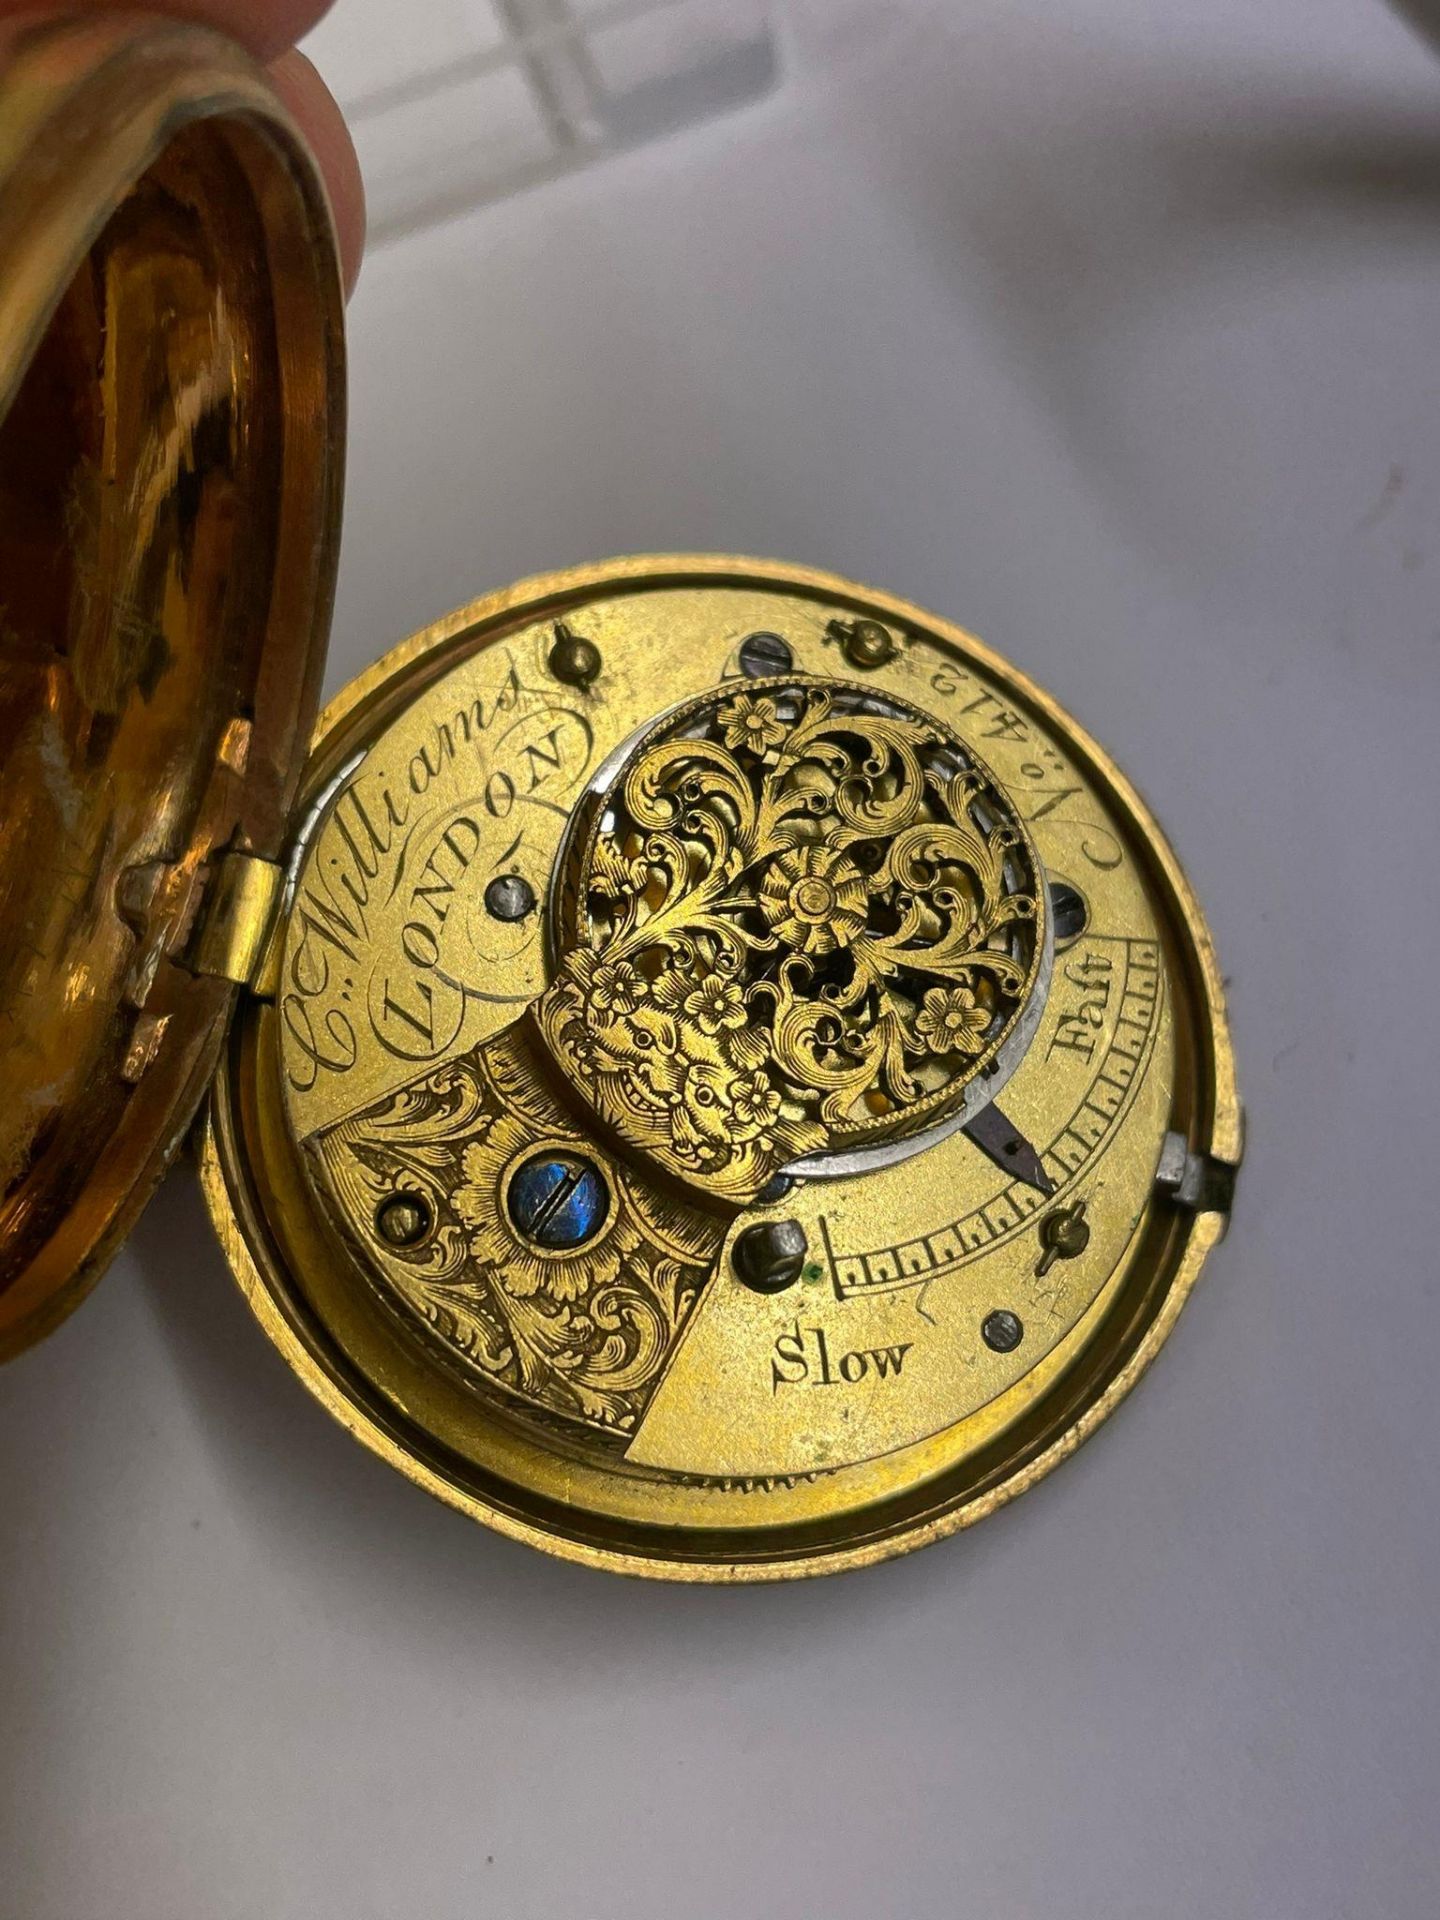 2x Gilt verge fusee pocket watch, one is in working order - Image 2 of 3